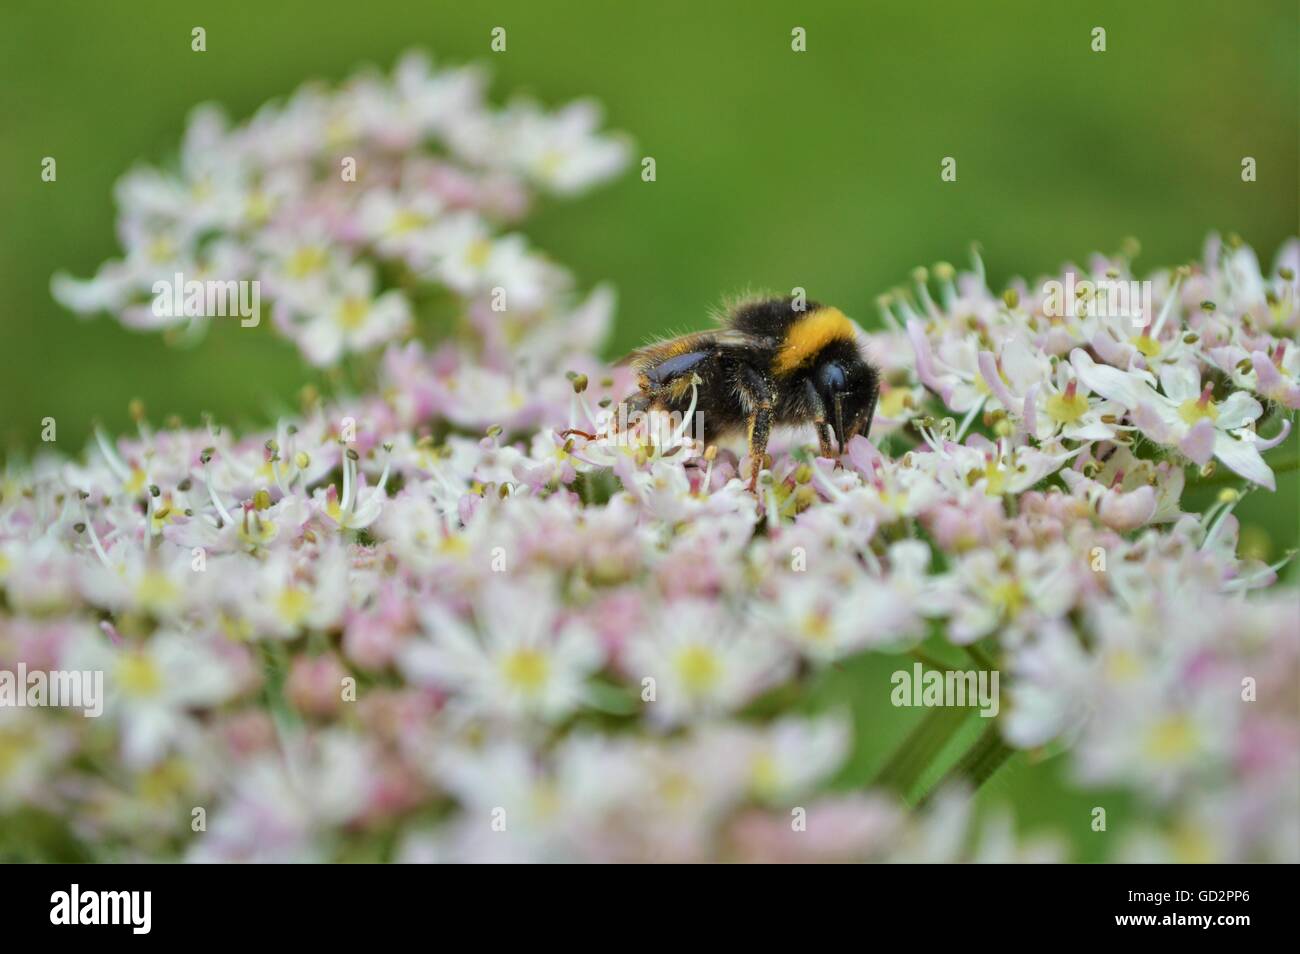 Bumble Bee on Flower Stock Photo